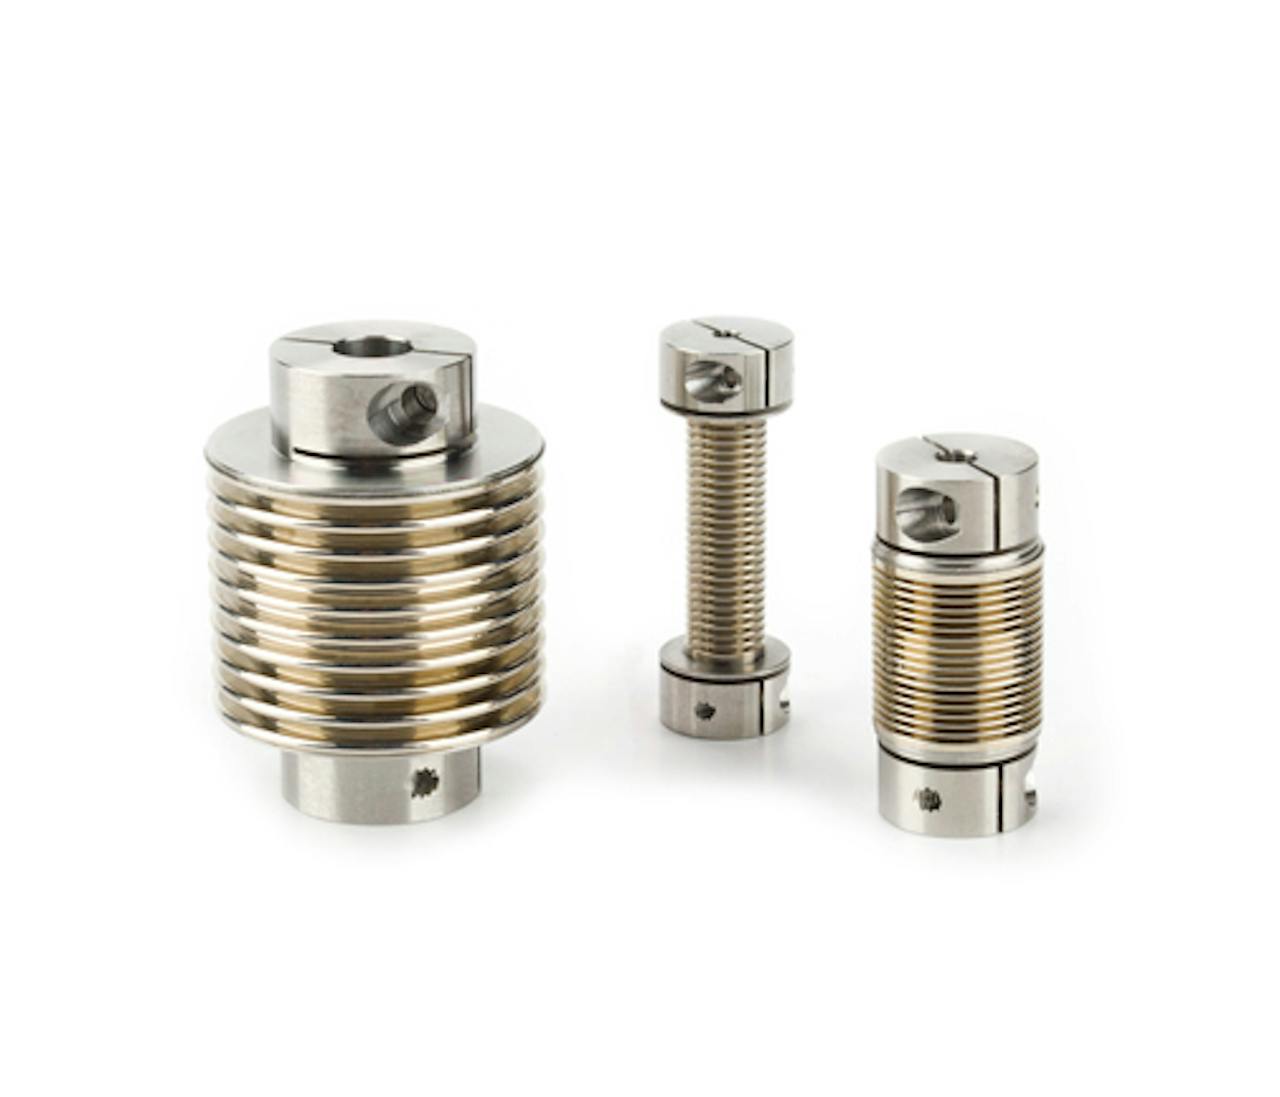 Custom bellows and couplings products